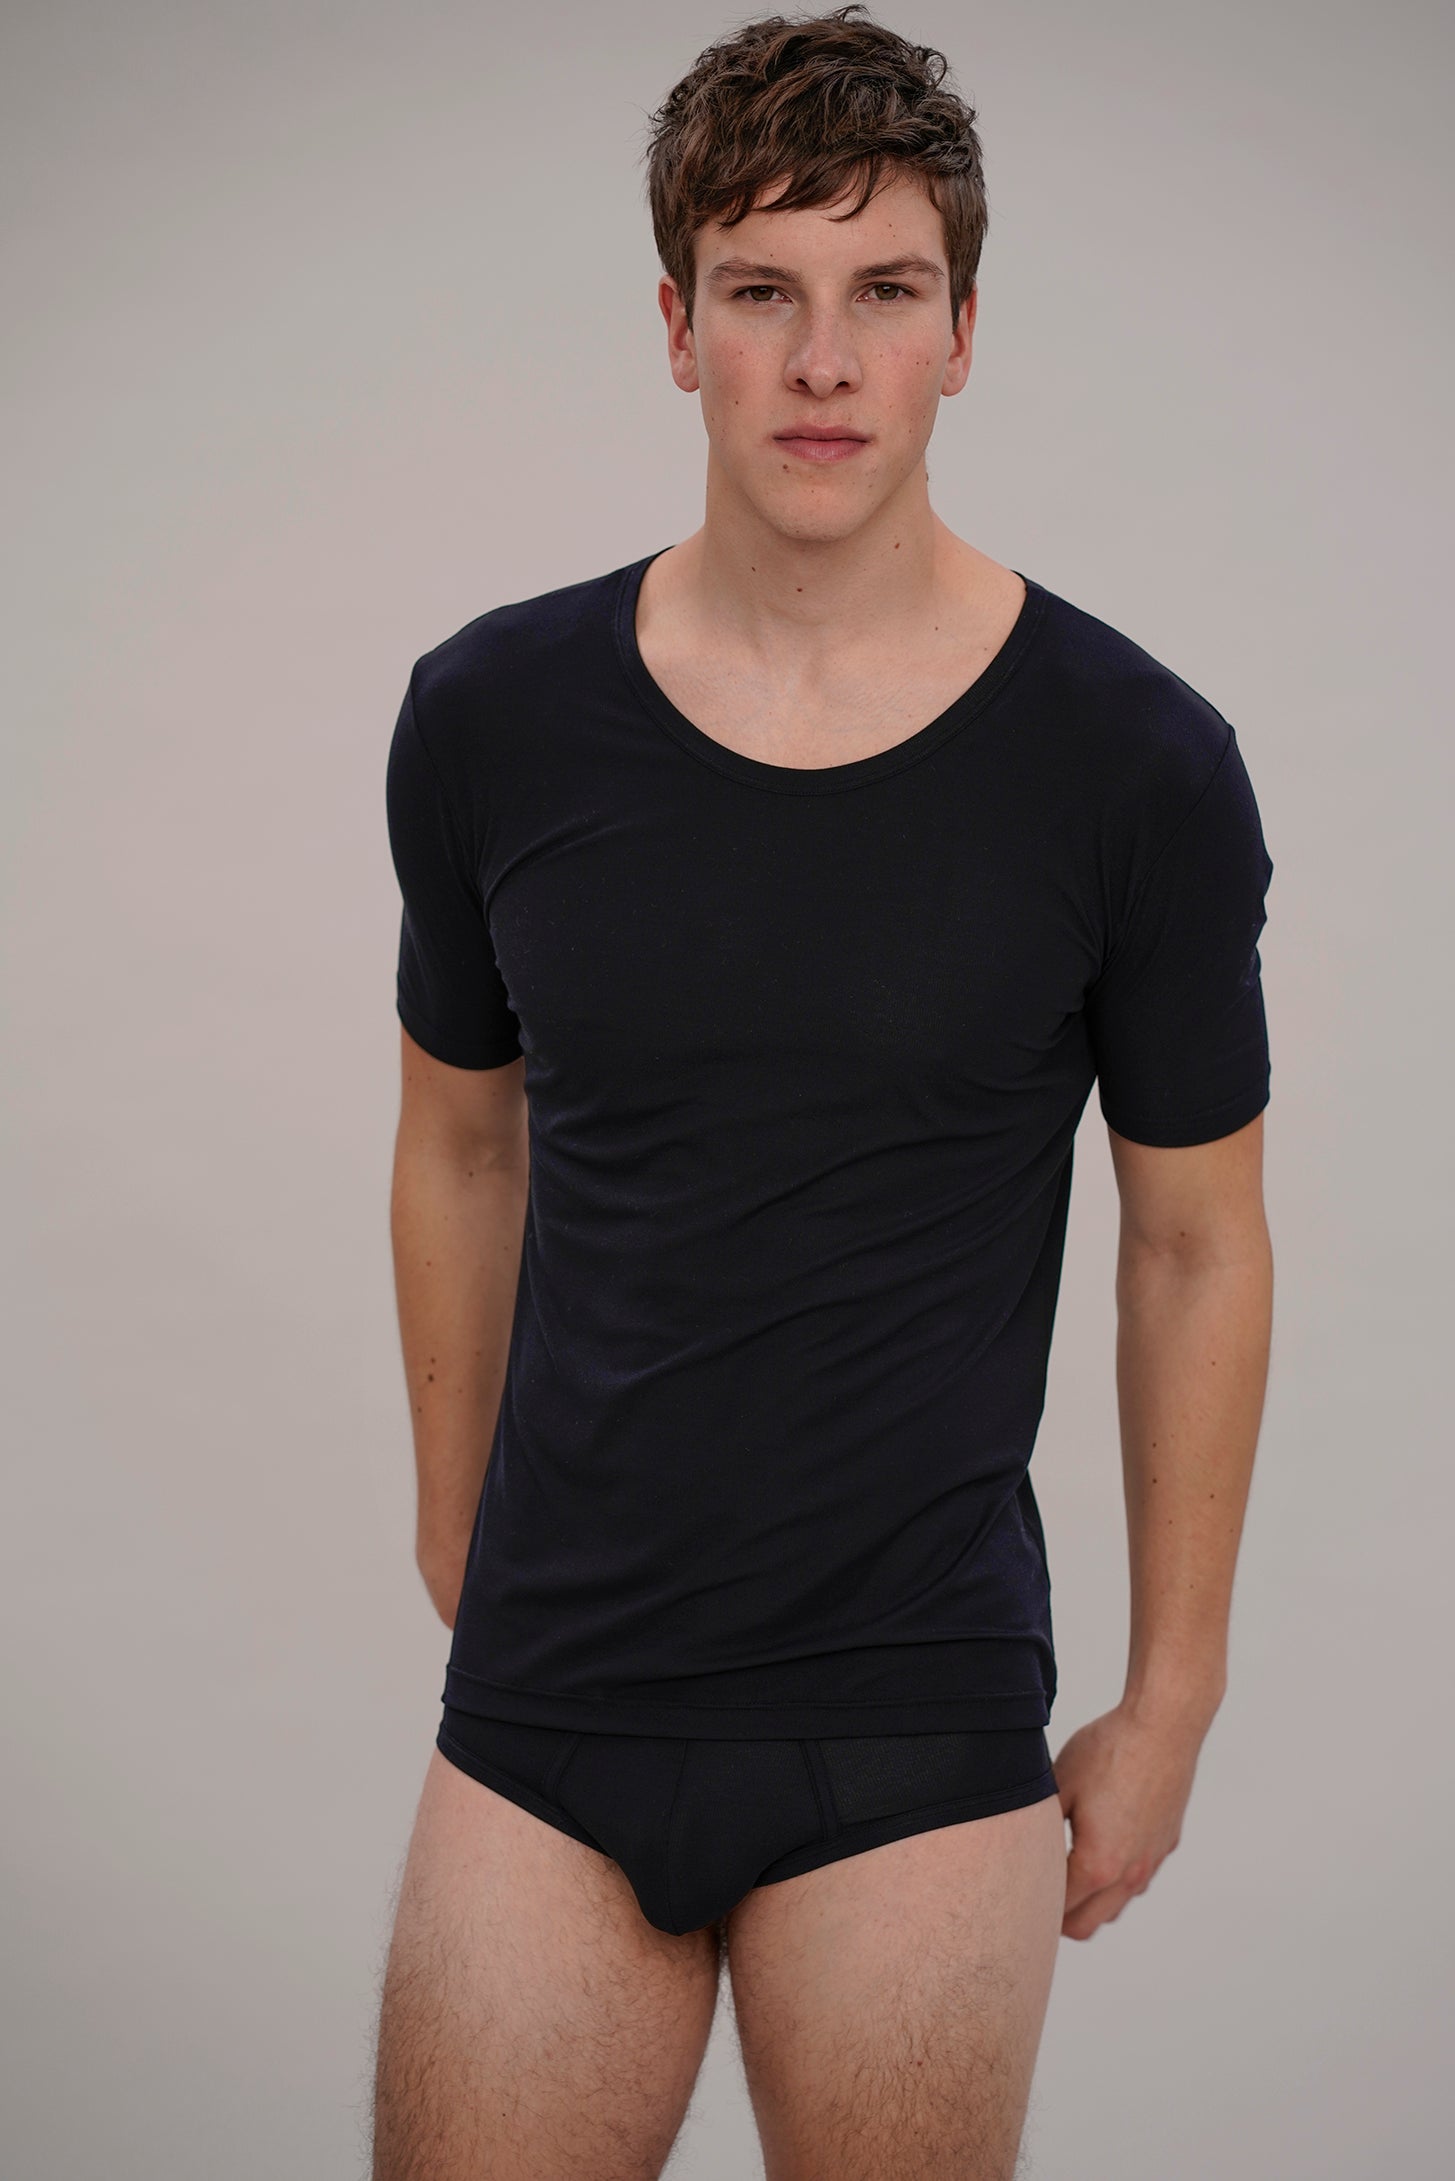 T-shirt in black made from natural MicroModal from moi-basics